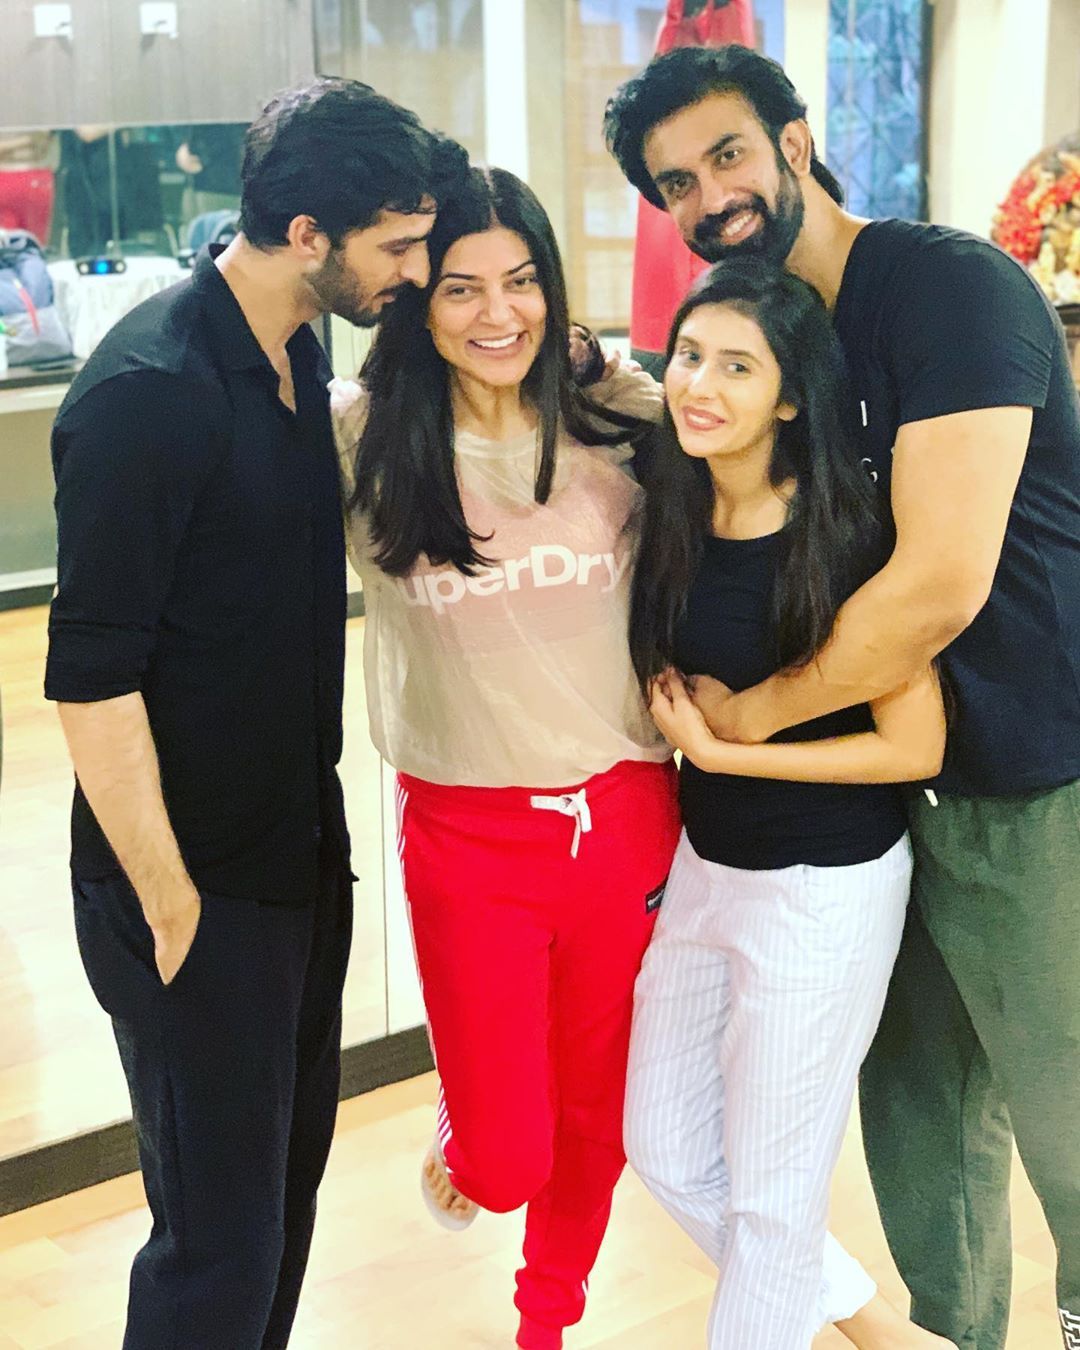 Sushmita Sen Shares An Emotional Note On Brother Rajeev's Marriage To Charu Asopa!